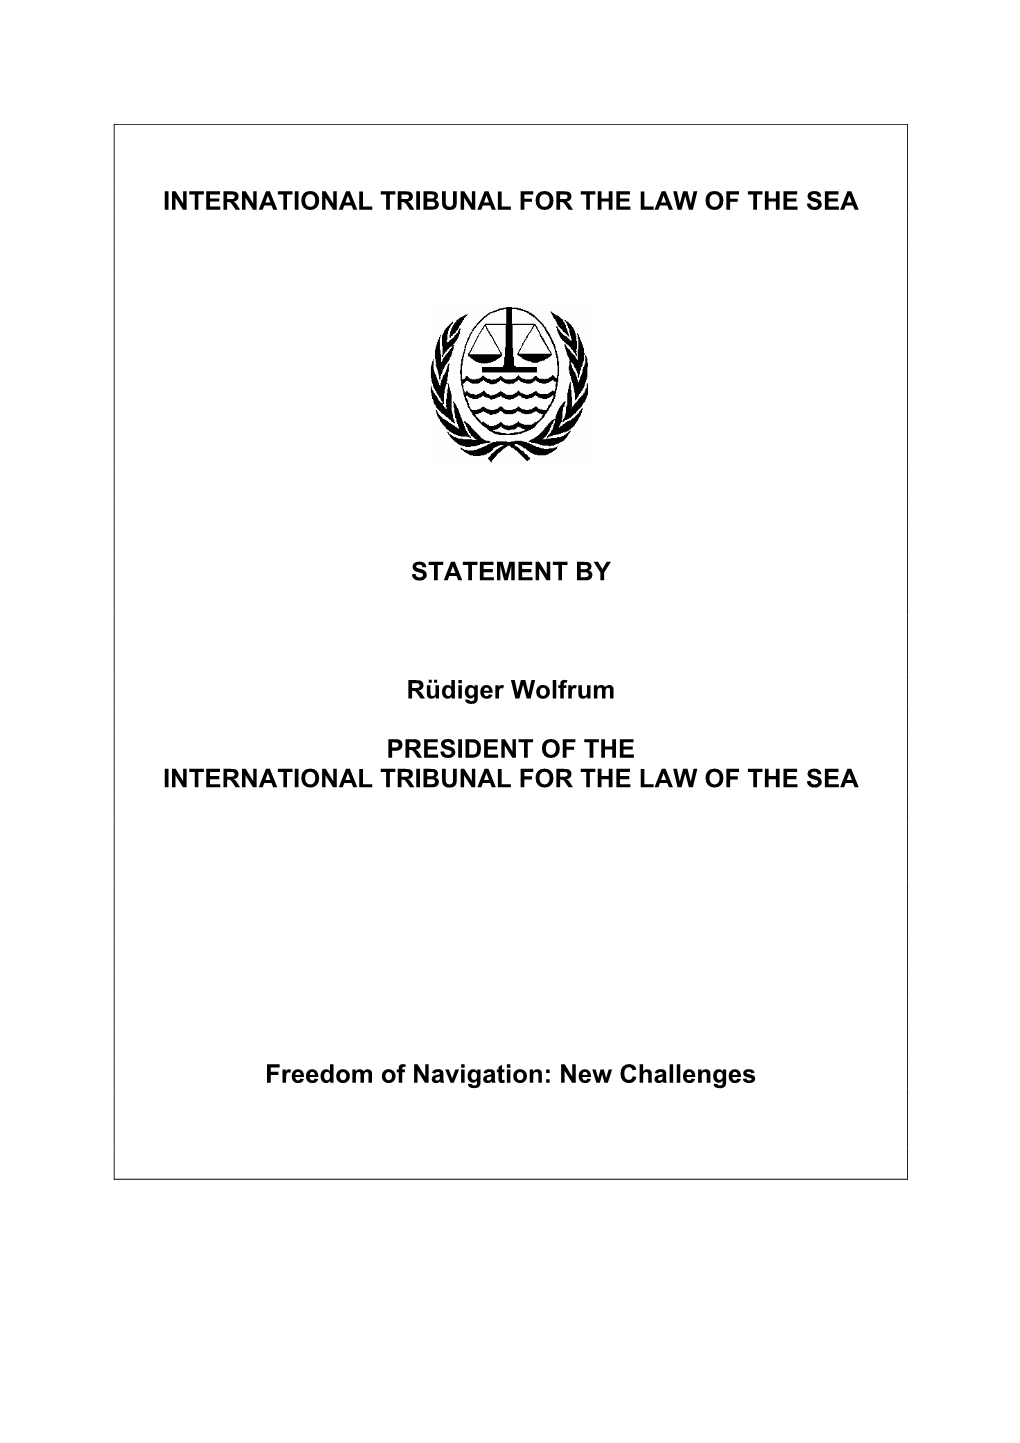 INTERNATIONAL TRIBUNAL for the LAW of the SEA STATEMENT by Rüdiger Wolfrum PRESIDENT of the INTERNATIONAL TRIBUNAL for THE